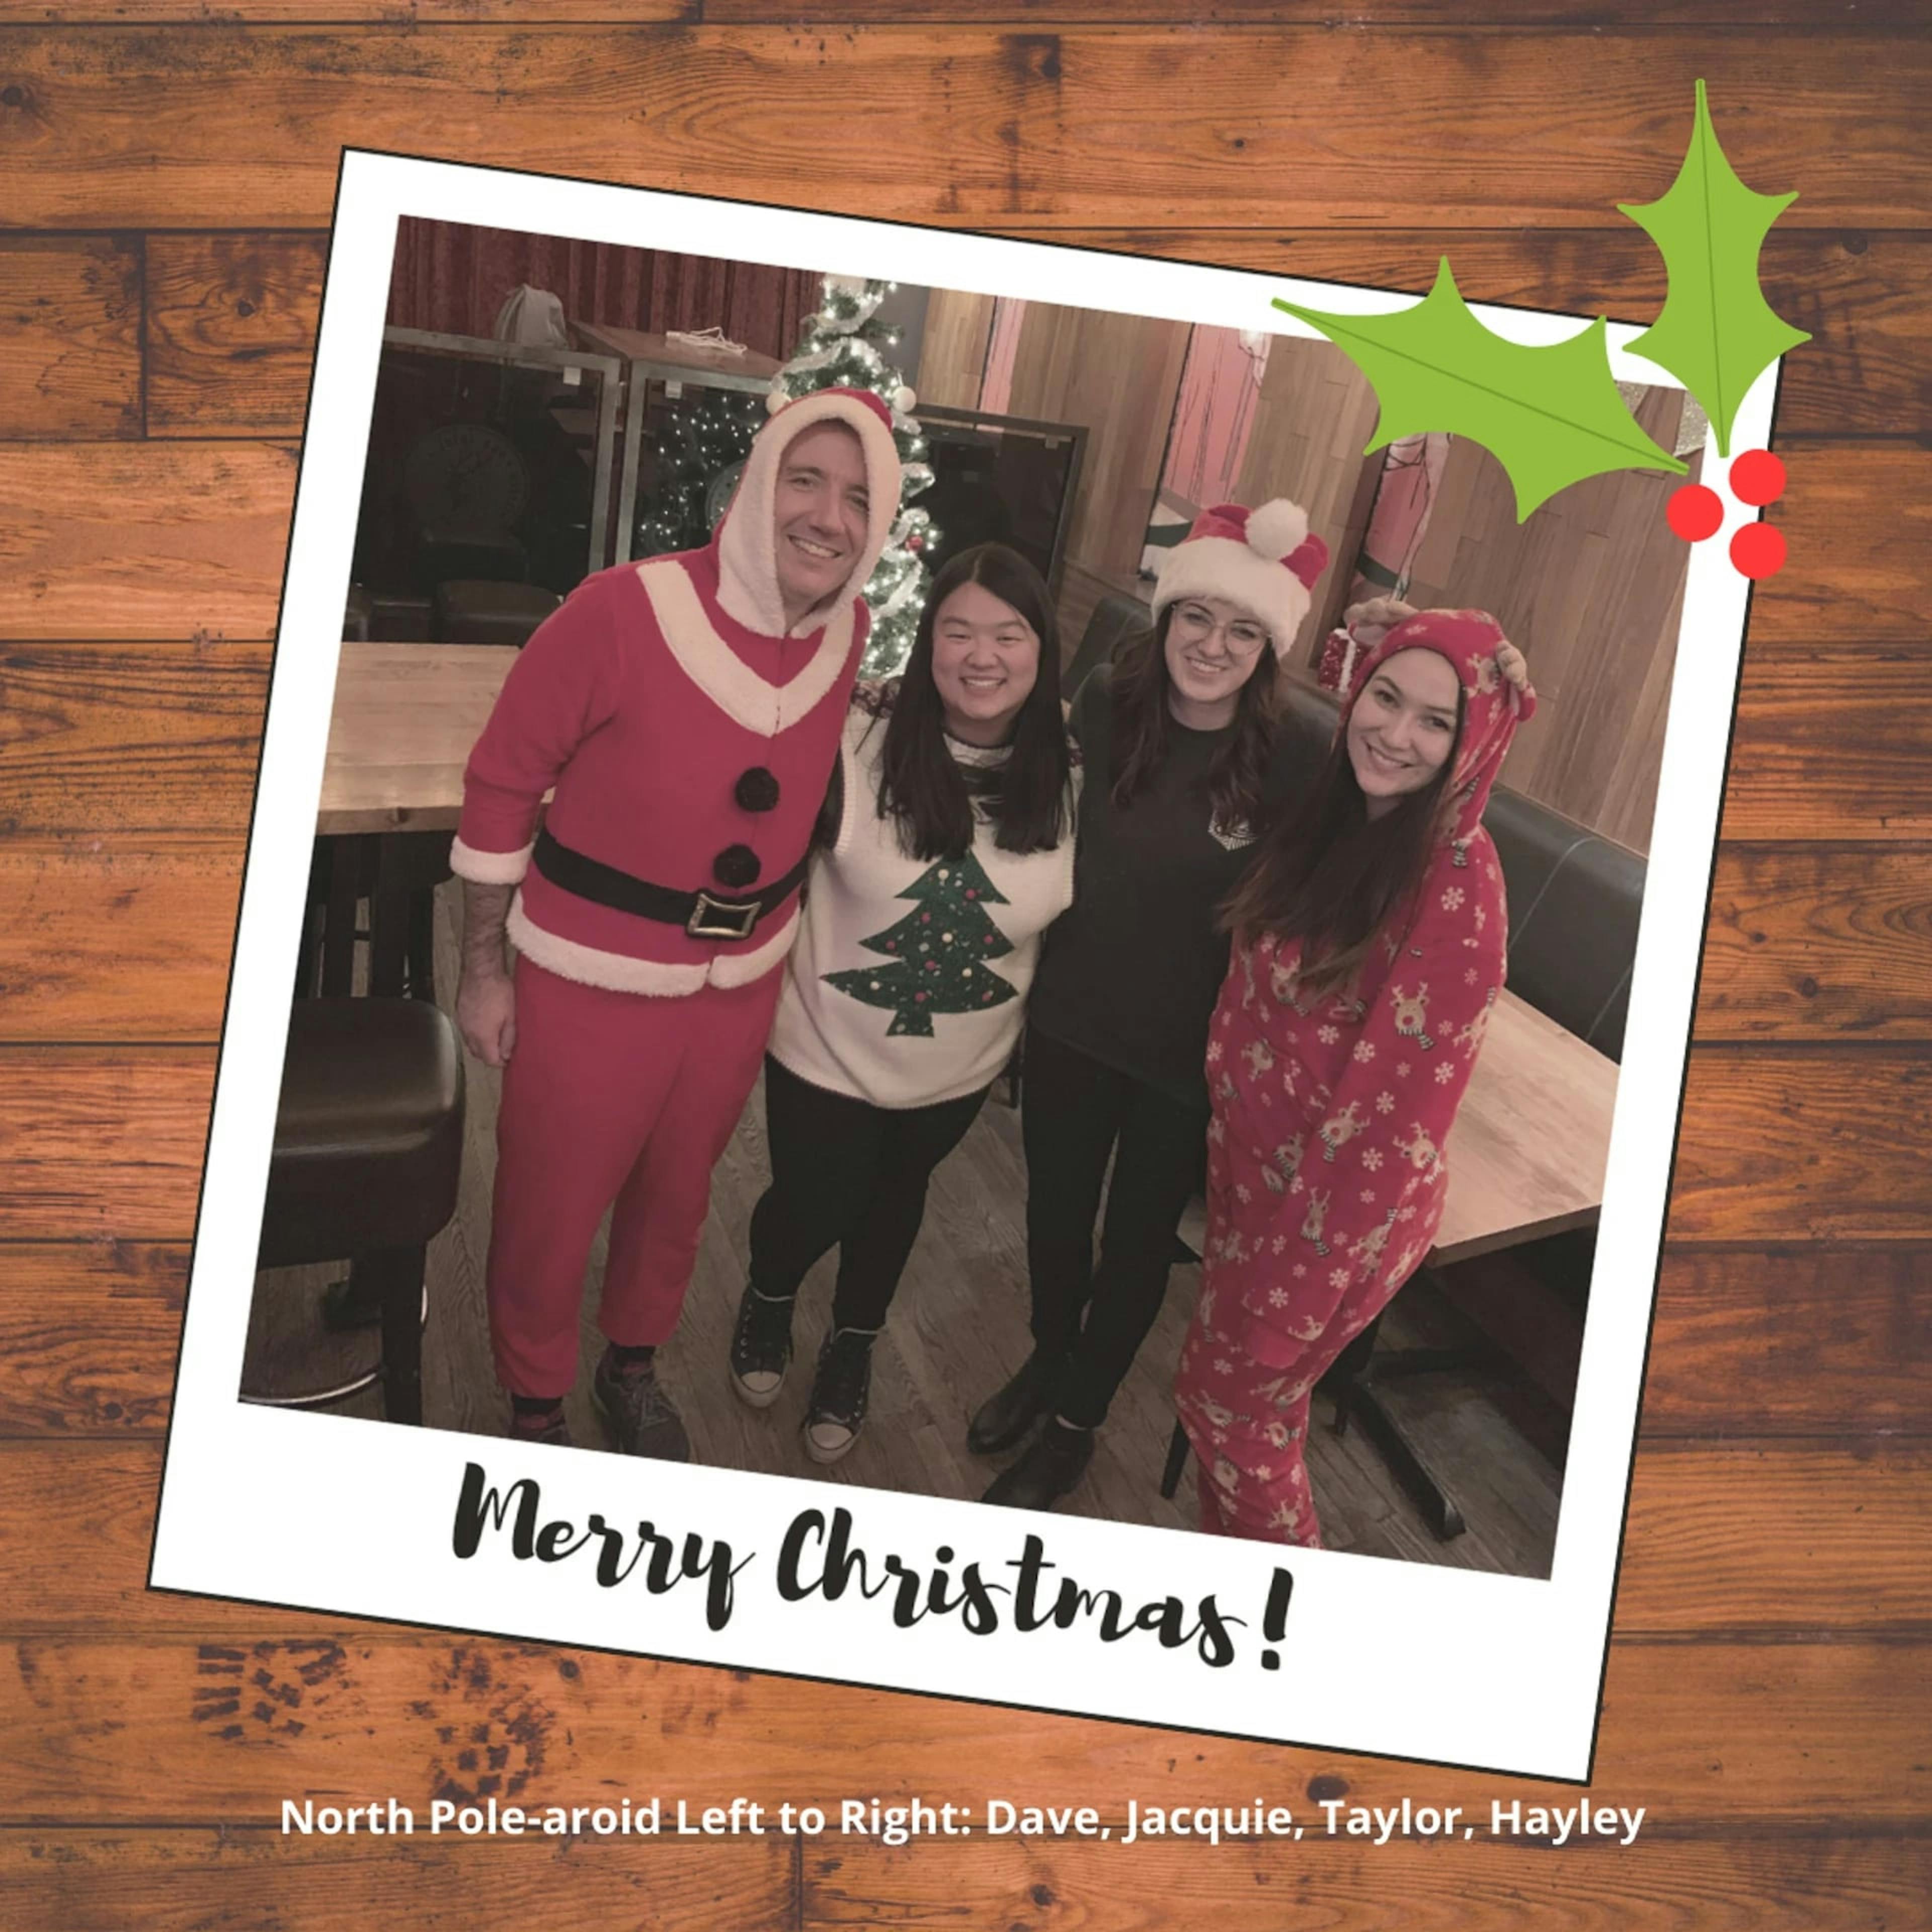 Image of the CCC staff in Christmas clothes